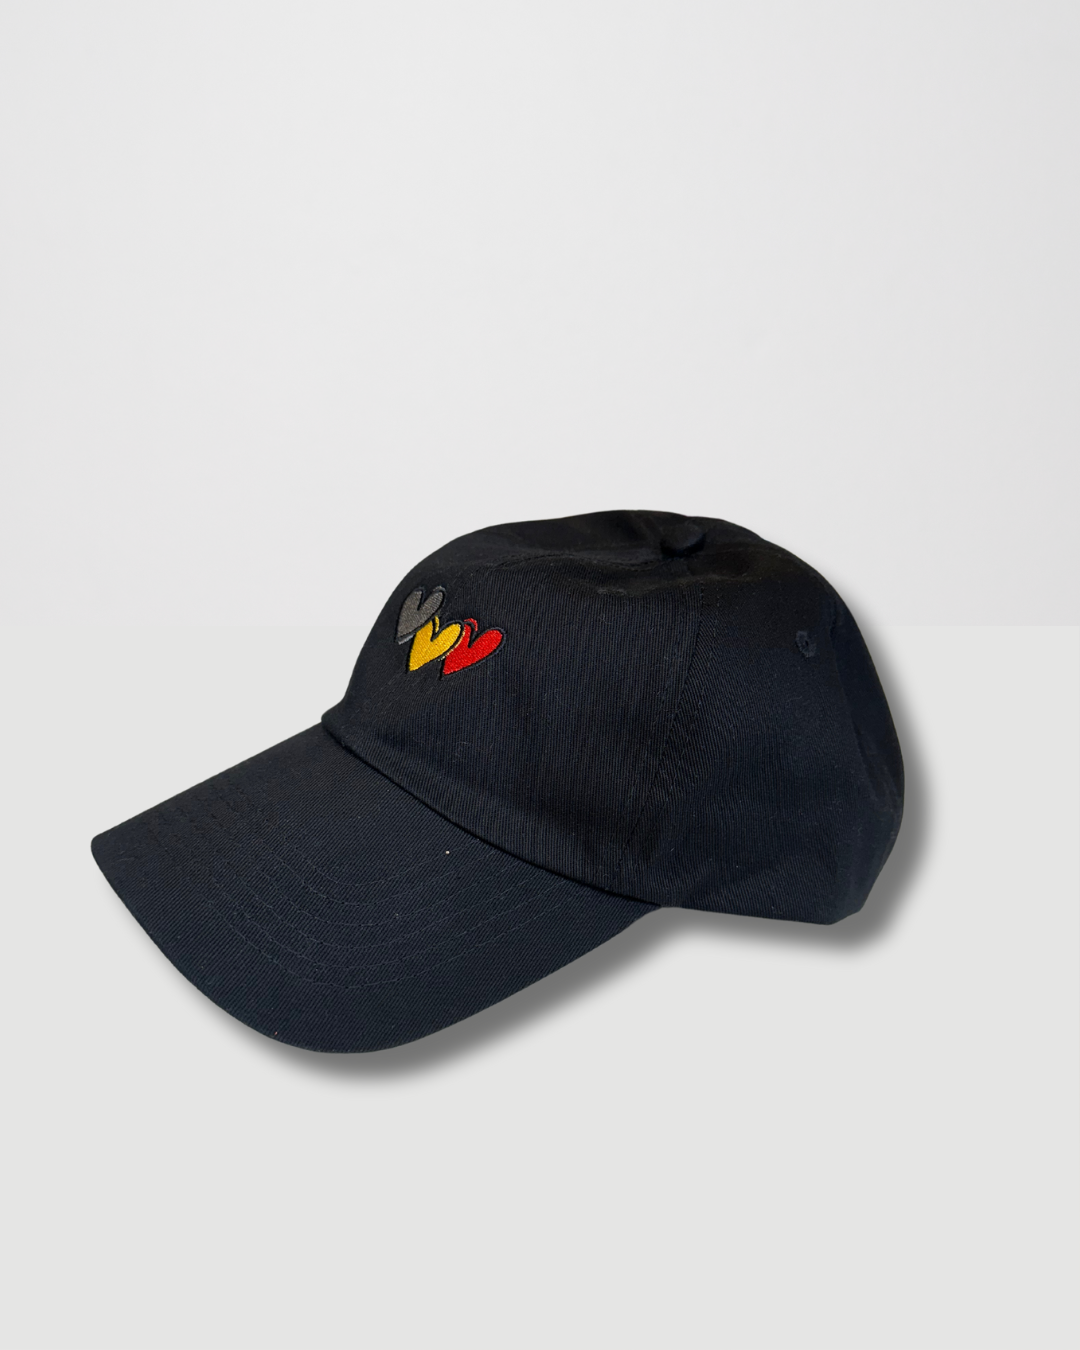 Clothing The Gaps. Blak Luv Cap. All black with  Red, black and yellow hearts embroidered on front. Clothing The Gaps embroidered on back in black stitching. Adjustable clip strap on back with silver clip featuring Clothing The Gaps logo.